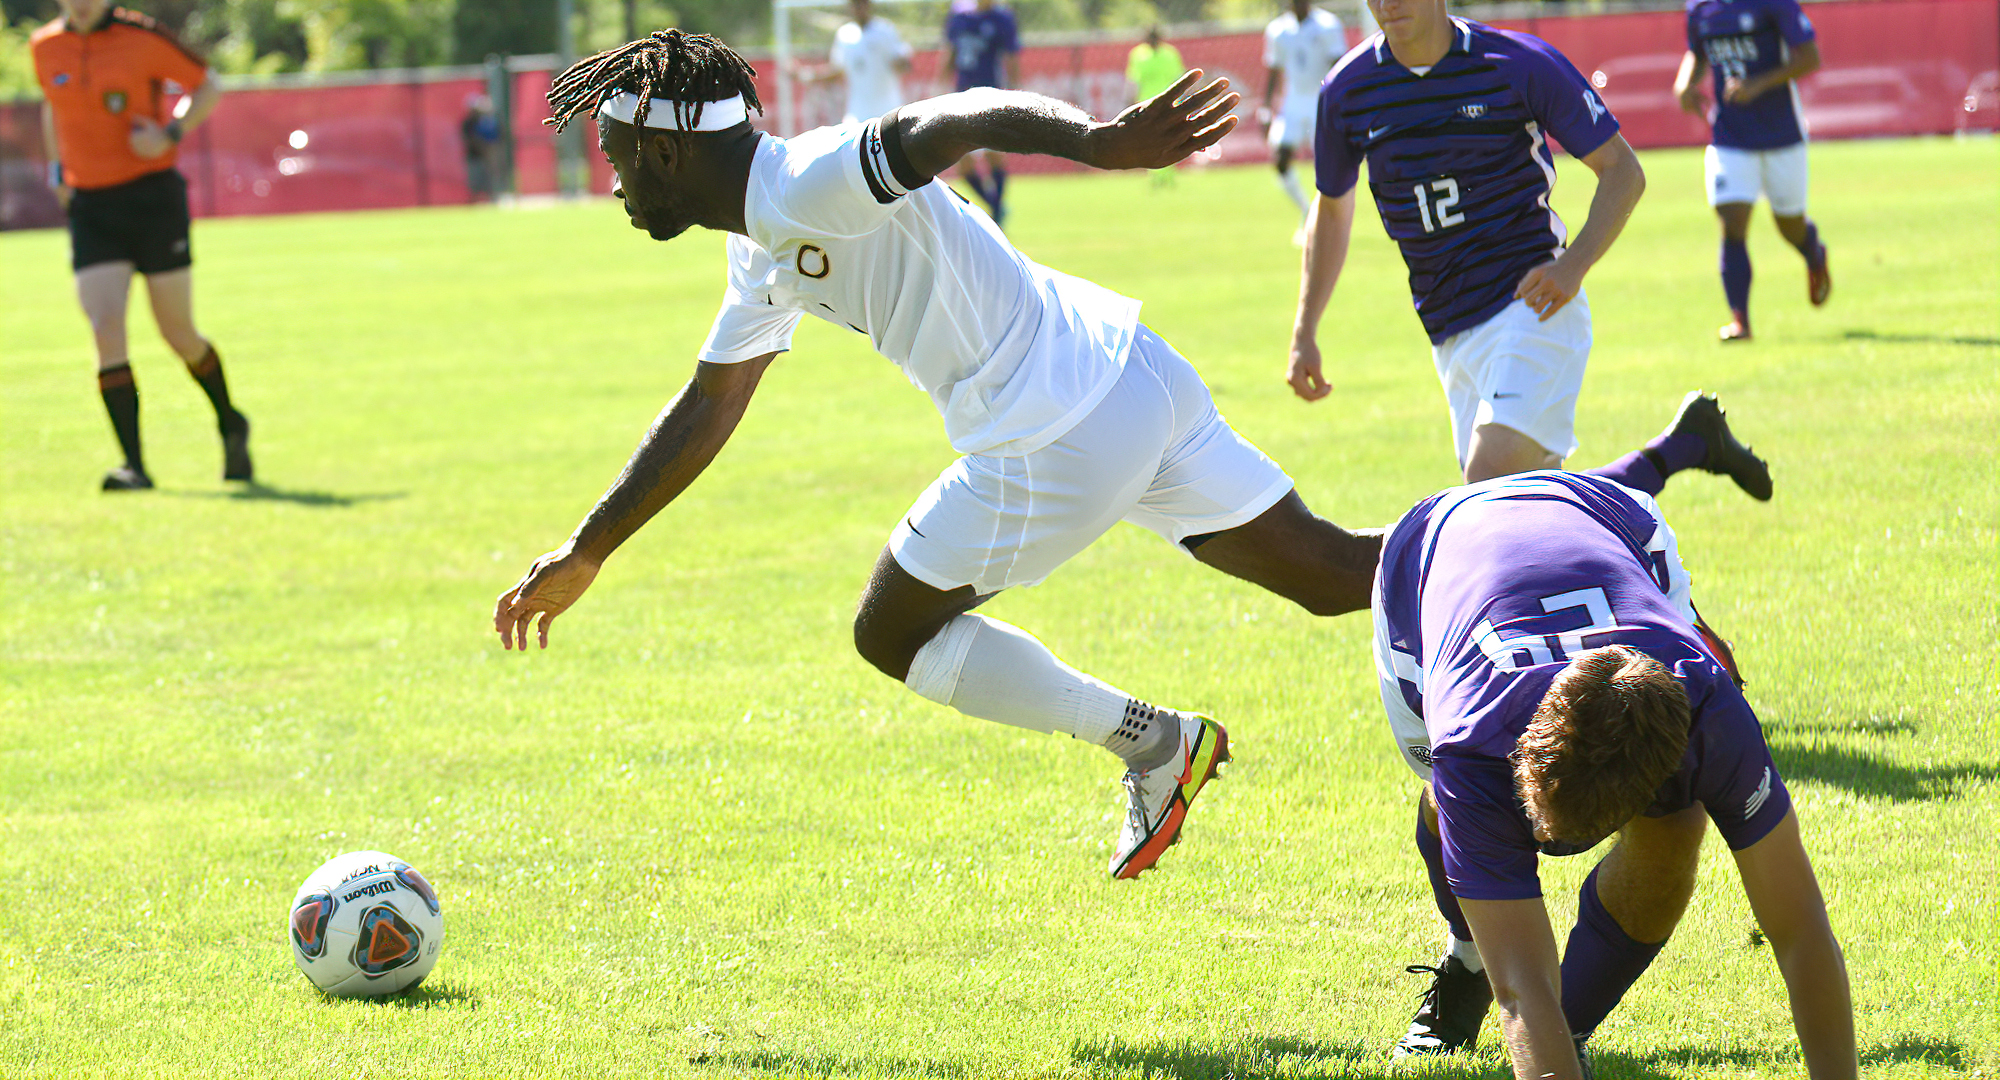 Junior Telvin Vah scored the Cobber goal in Concordia's game at Augsburg. Vah now has nine goals and 22 points on the year.